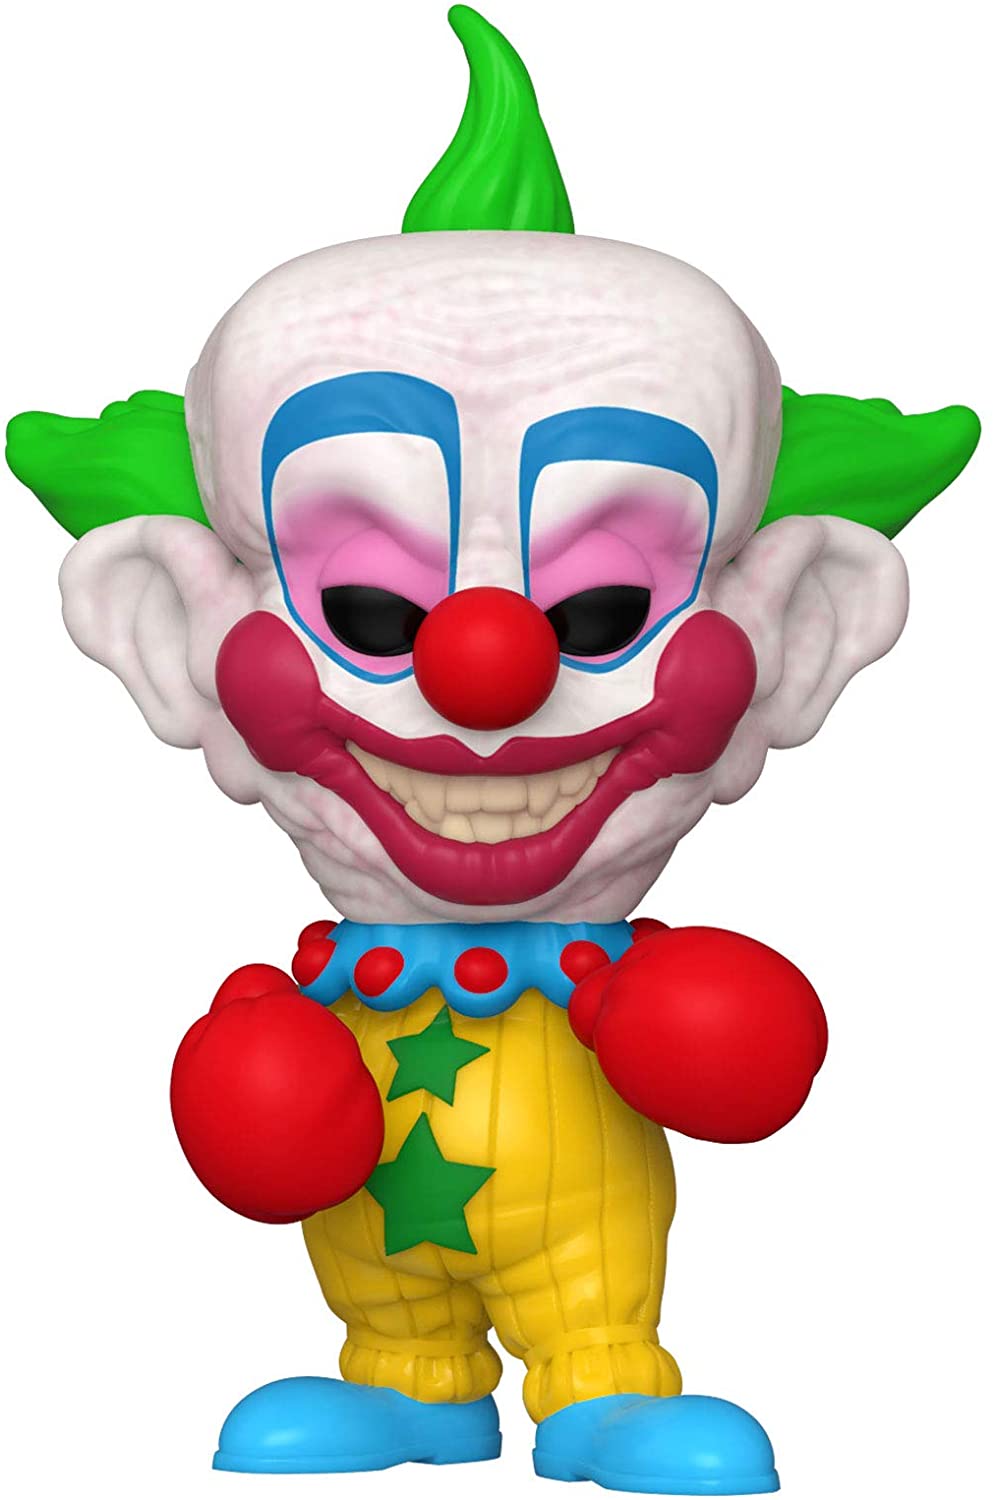 Funko Pop Movies: Killer Klowns From Outer Space - Shorty Vinyl Figure